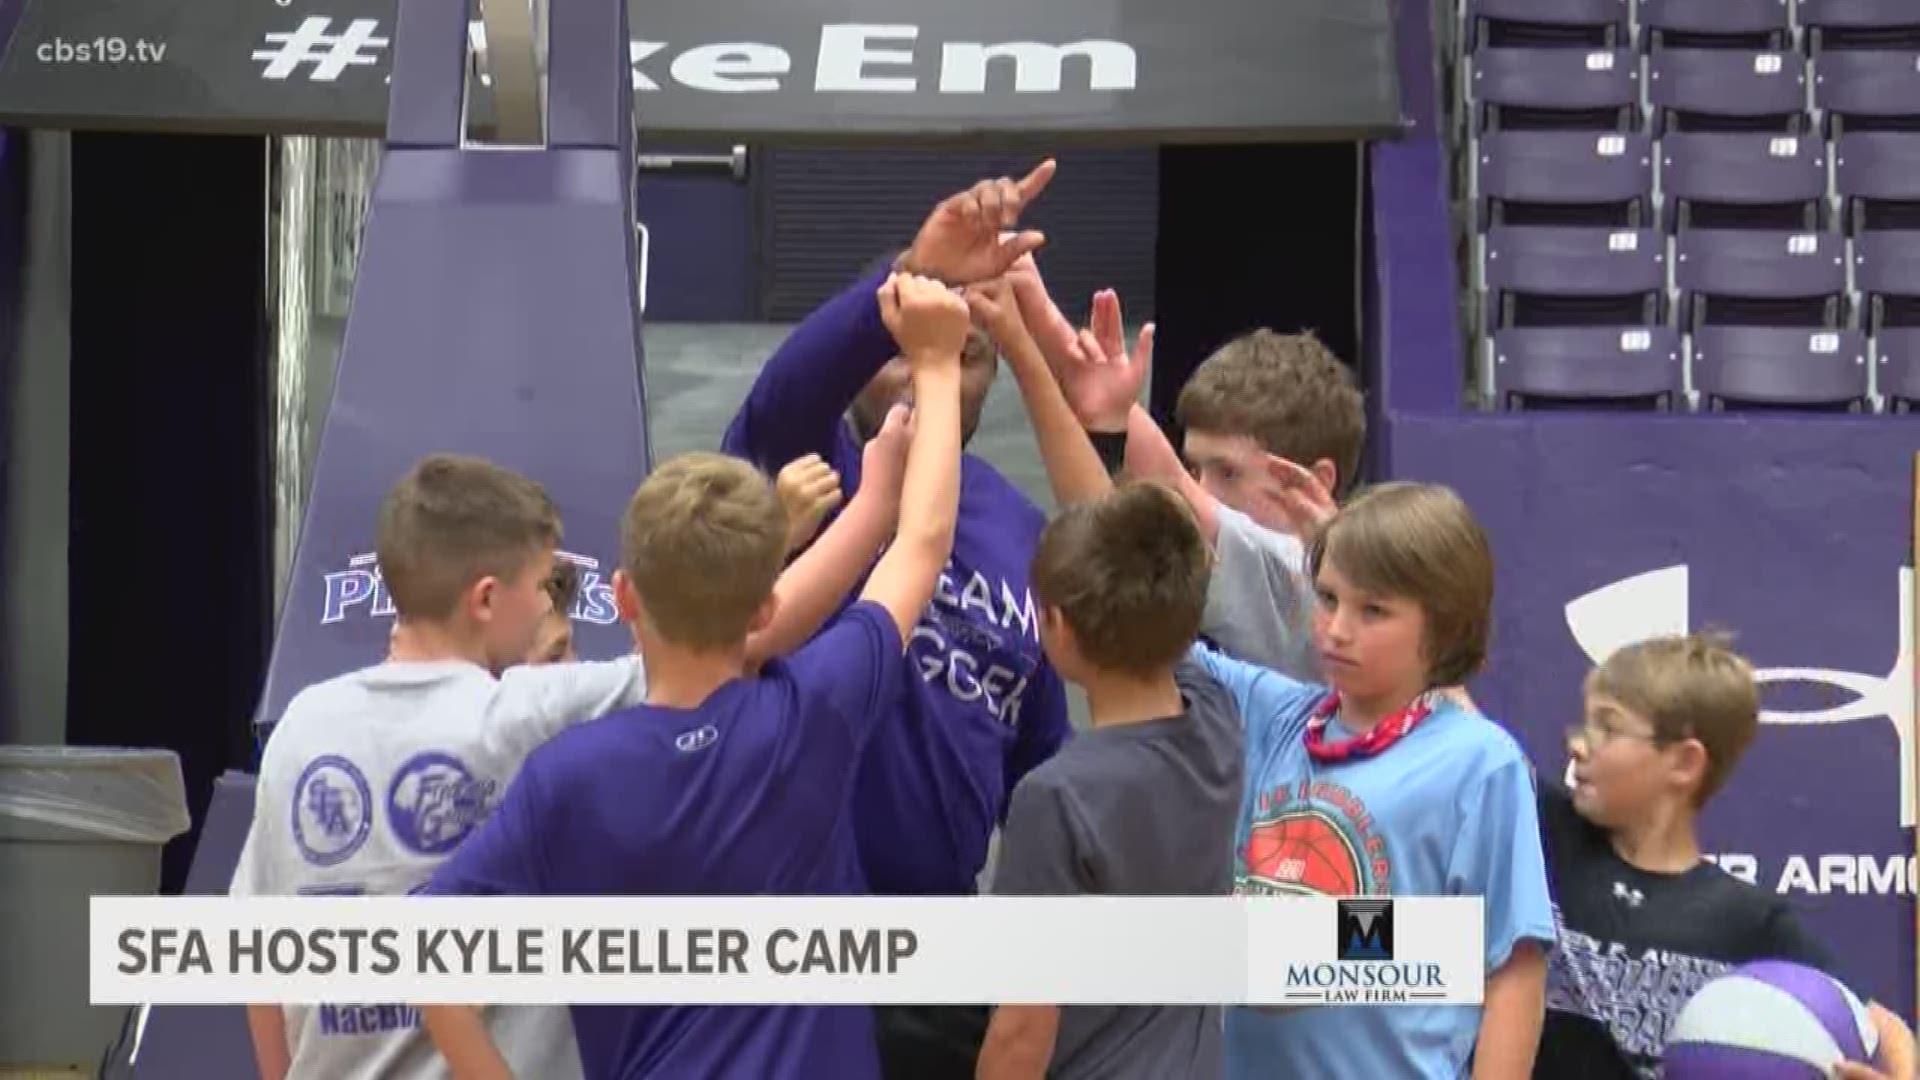 William R. Johnson Coliseum was the sight of the 2019 Kyle Keller Basketball Camp from Stephen F. Austin State University. The camp daily schedule included a balanced mix of drills, contests, team practice, and games, which allows for a fun-filled learning experience.